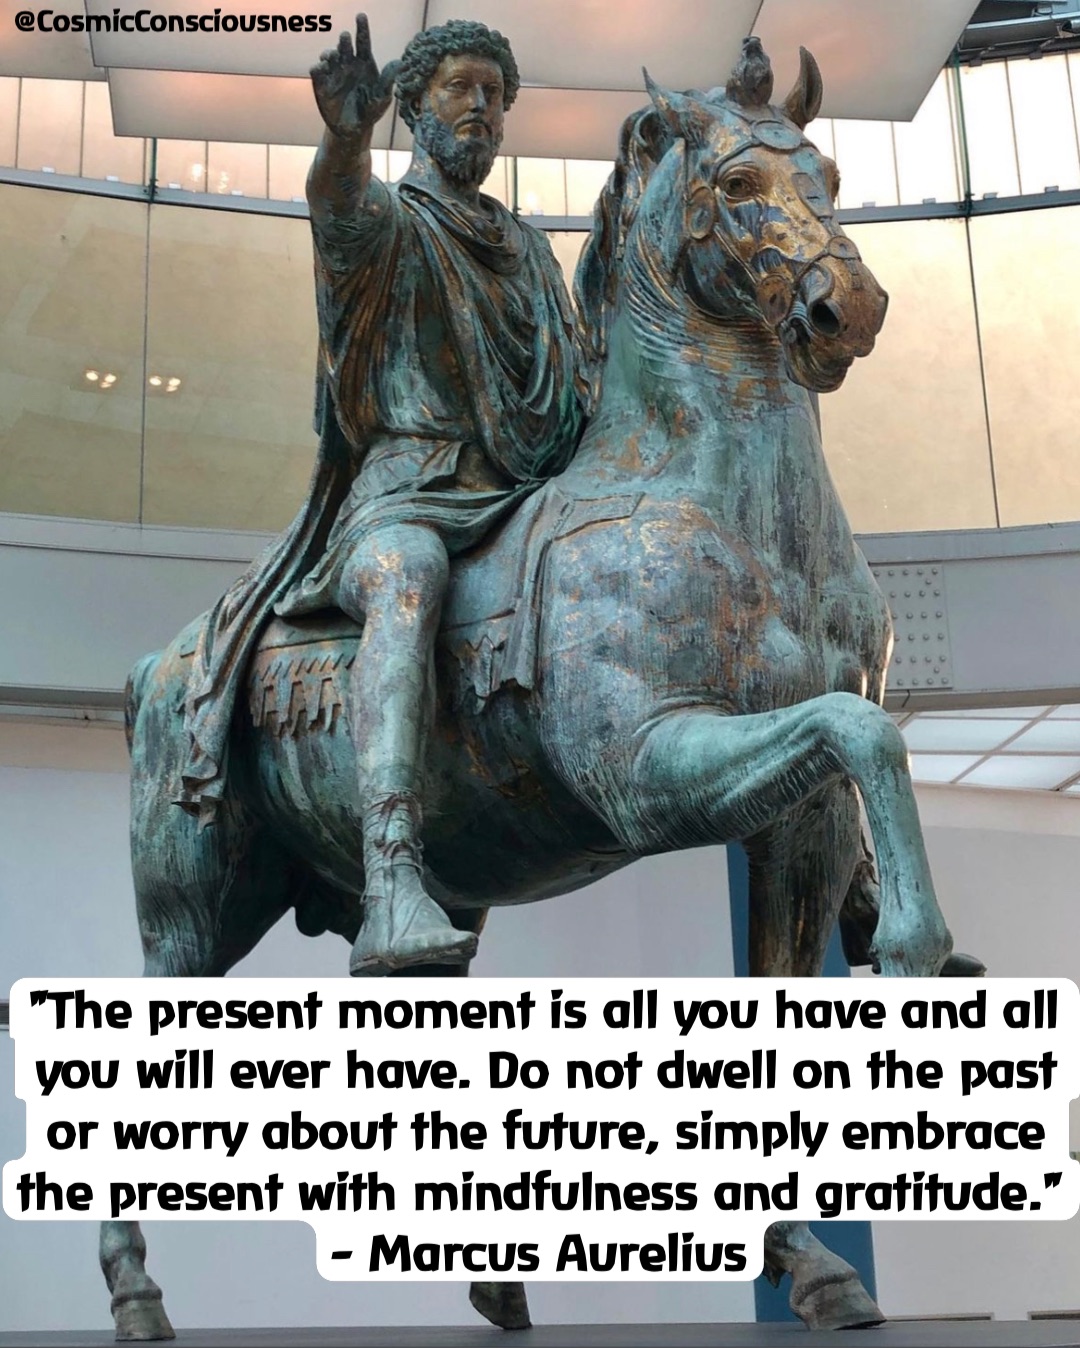 "The present moment is all you have and all you will ever have. Do not dwell on the past or worry about the future, simply embrace the present with mindfulness and gratitude." 
- Marcus Aurelius @CosmicConsciousness